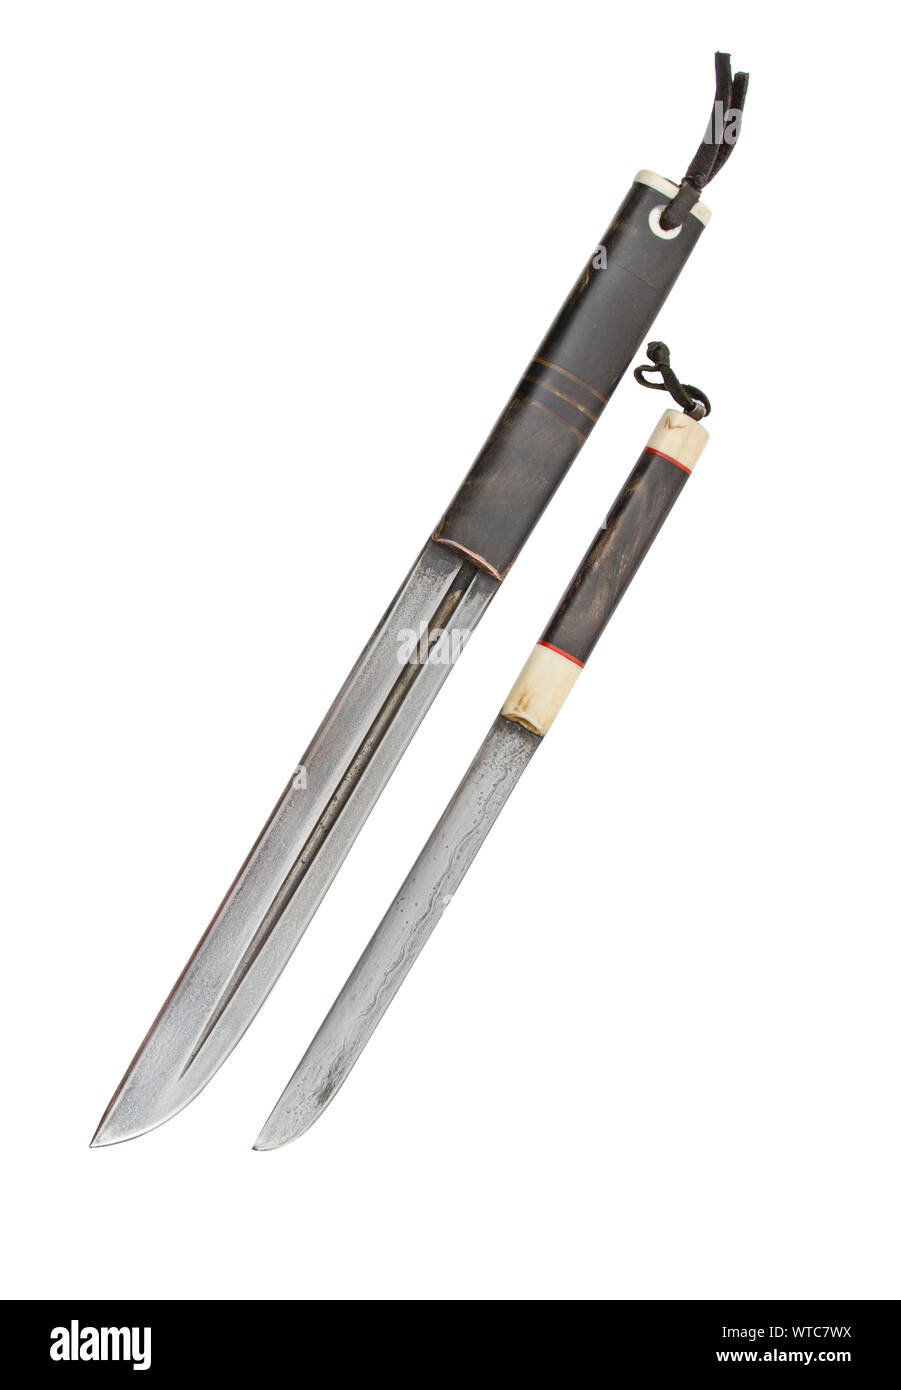 Characteristic Georgian, Khevsur Region dagger of the 19th century with utility knife. Stock Photo